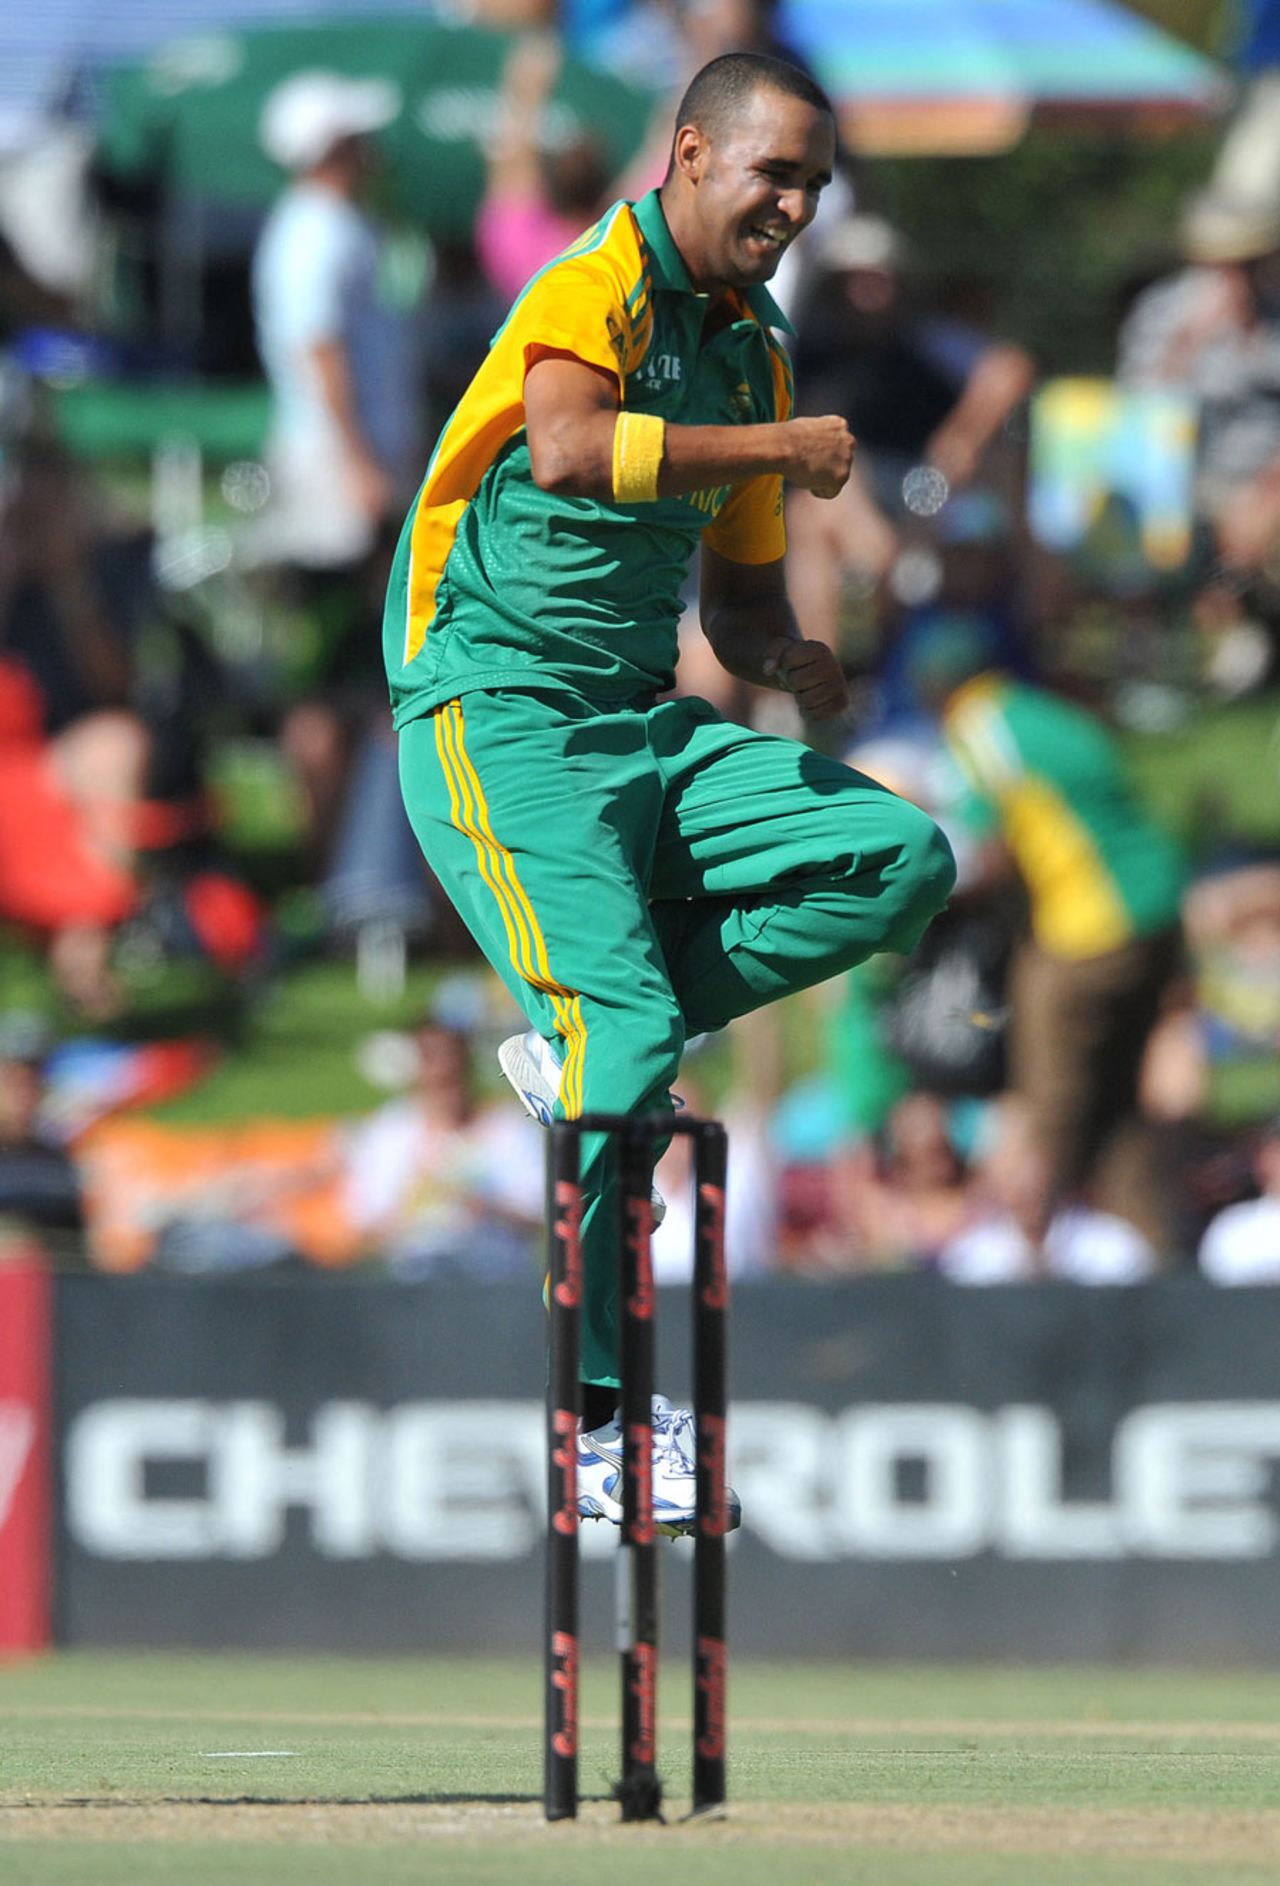 Robin Peterson jumps for joy after taking a wicket, South Africa v Sri Lanka, 3rd ODI, Bloemfontein, January 17, 2012